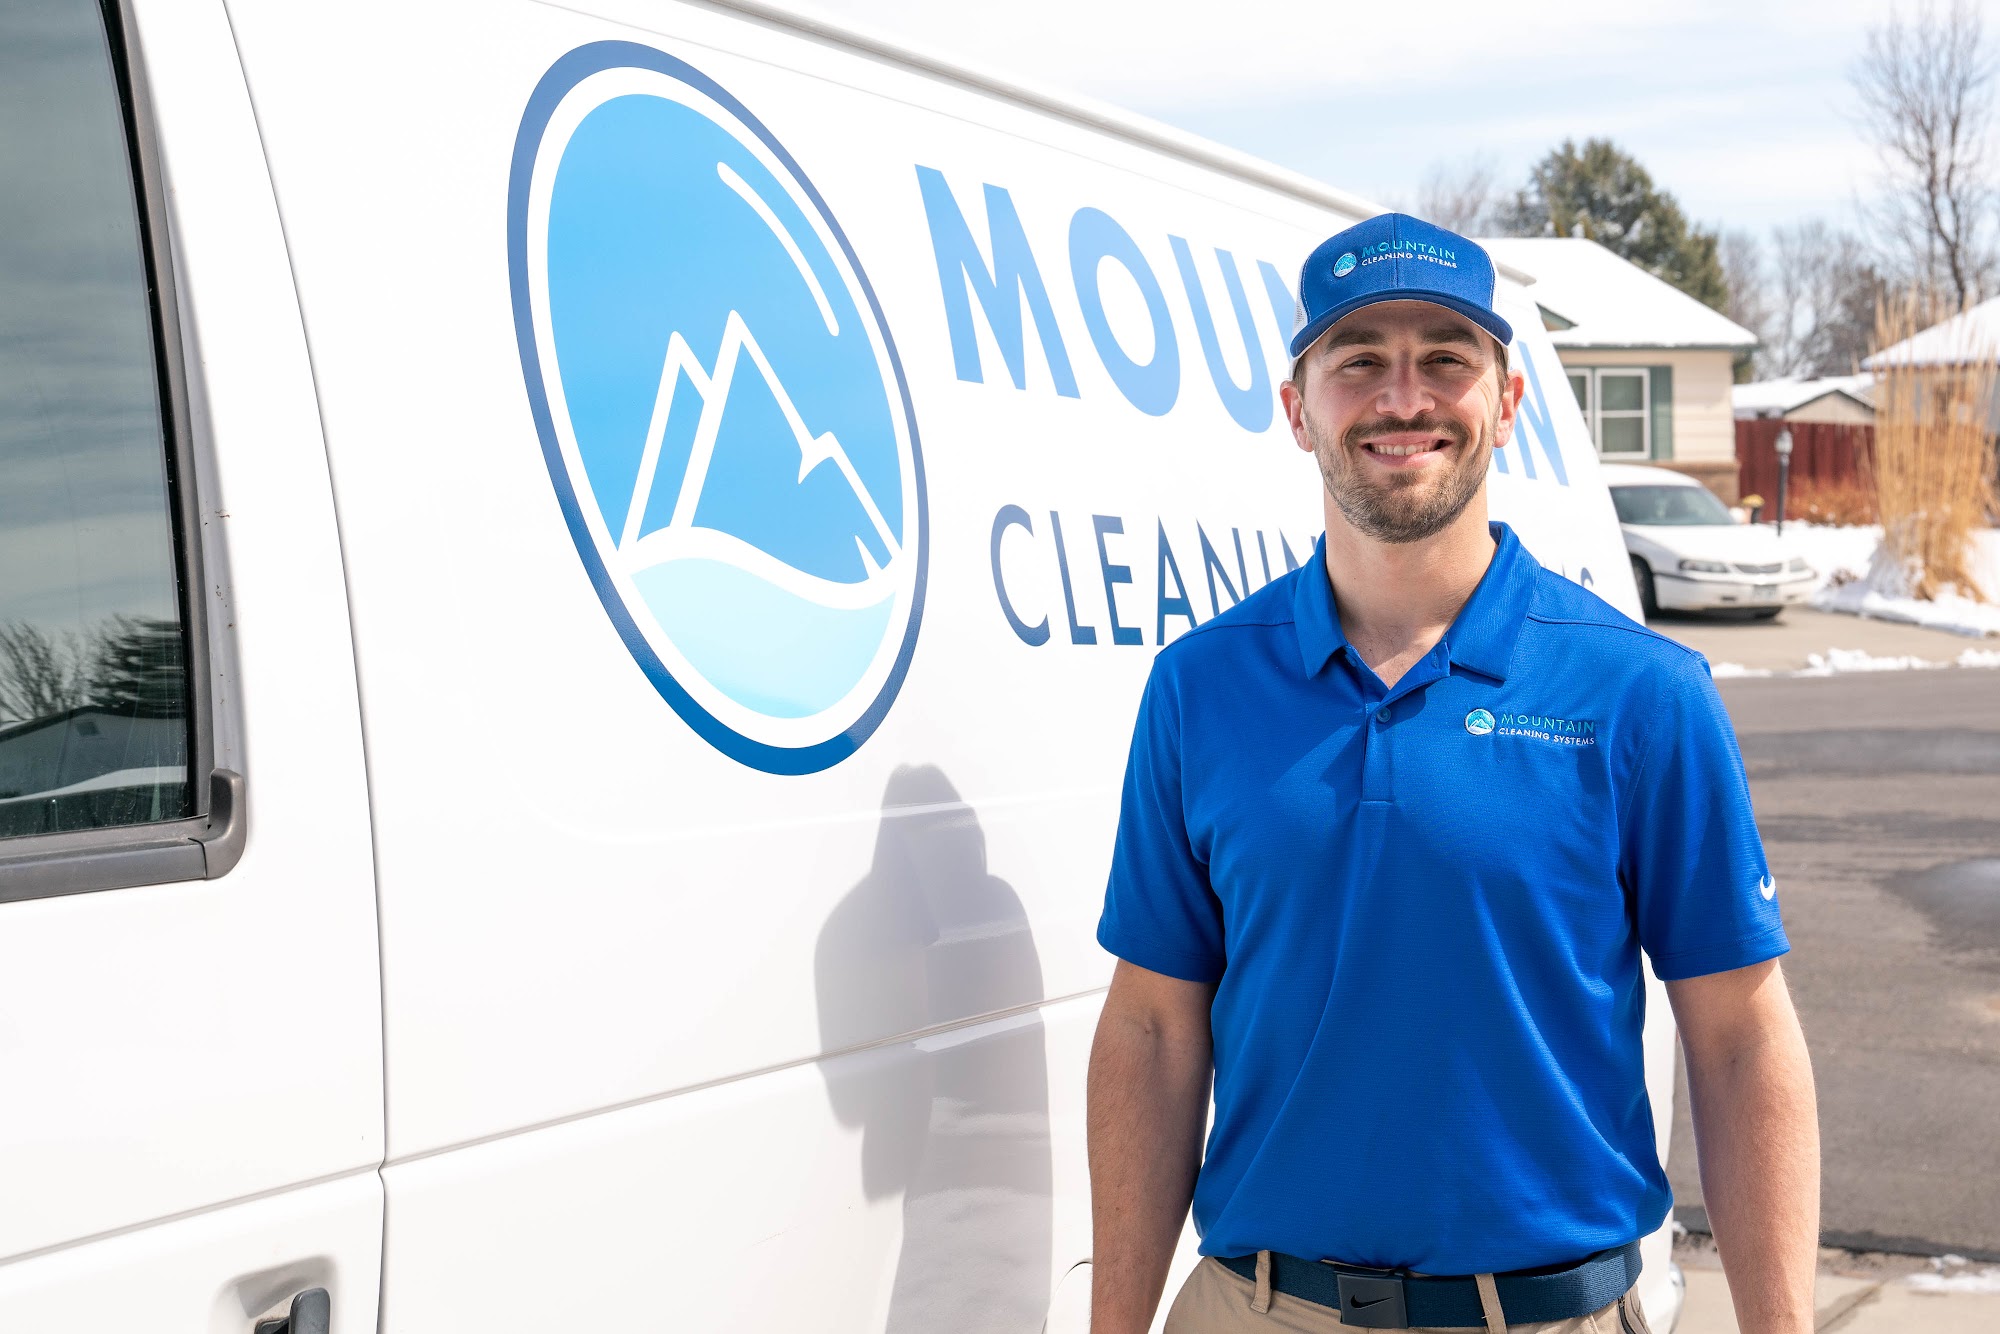 Mountain Cleaning Systems